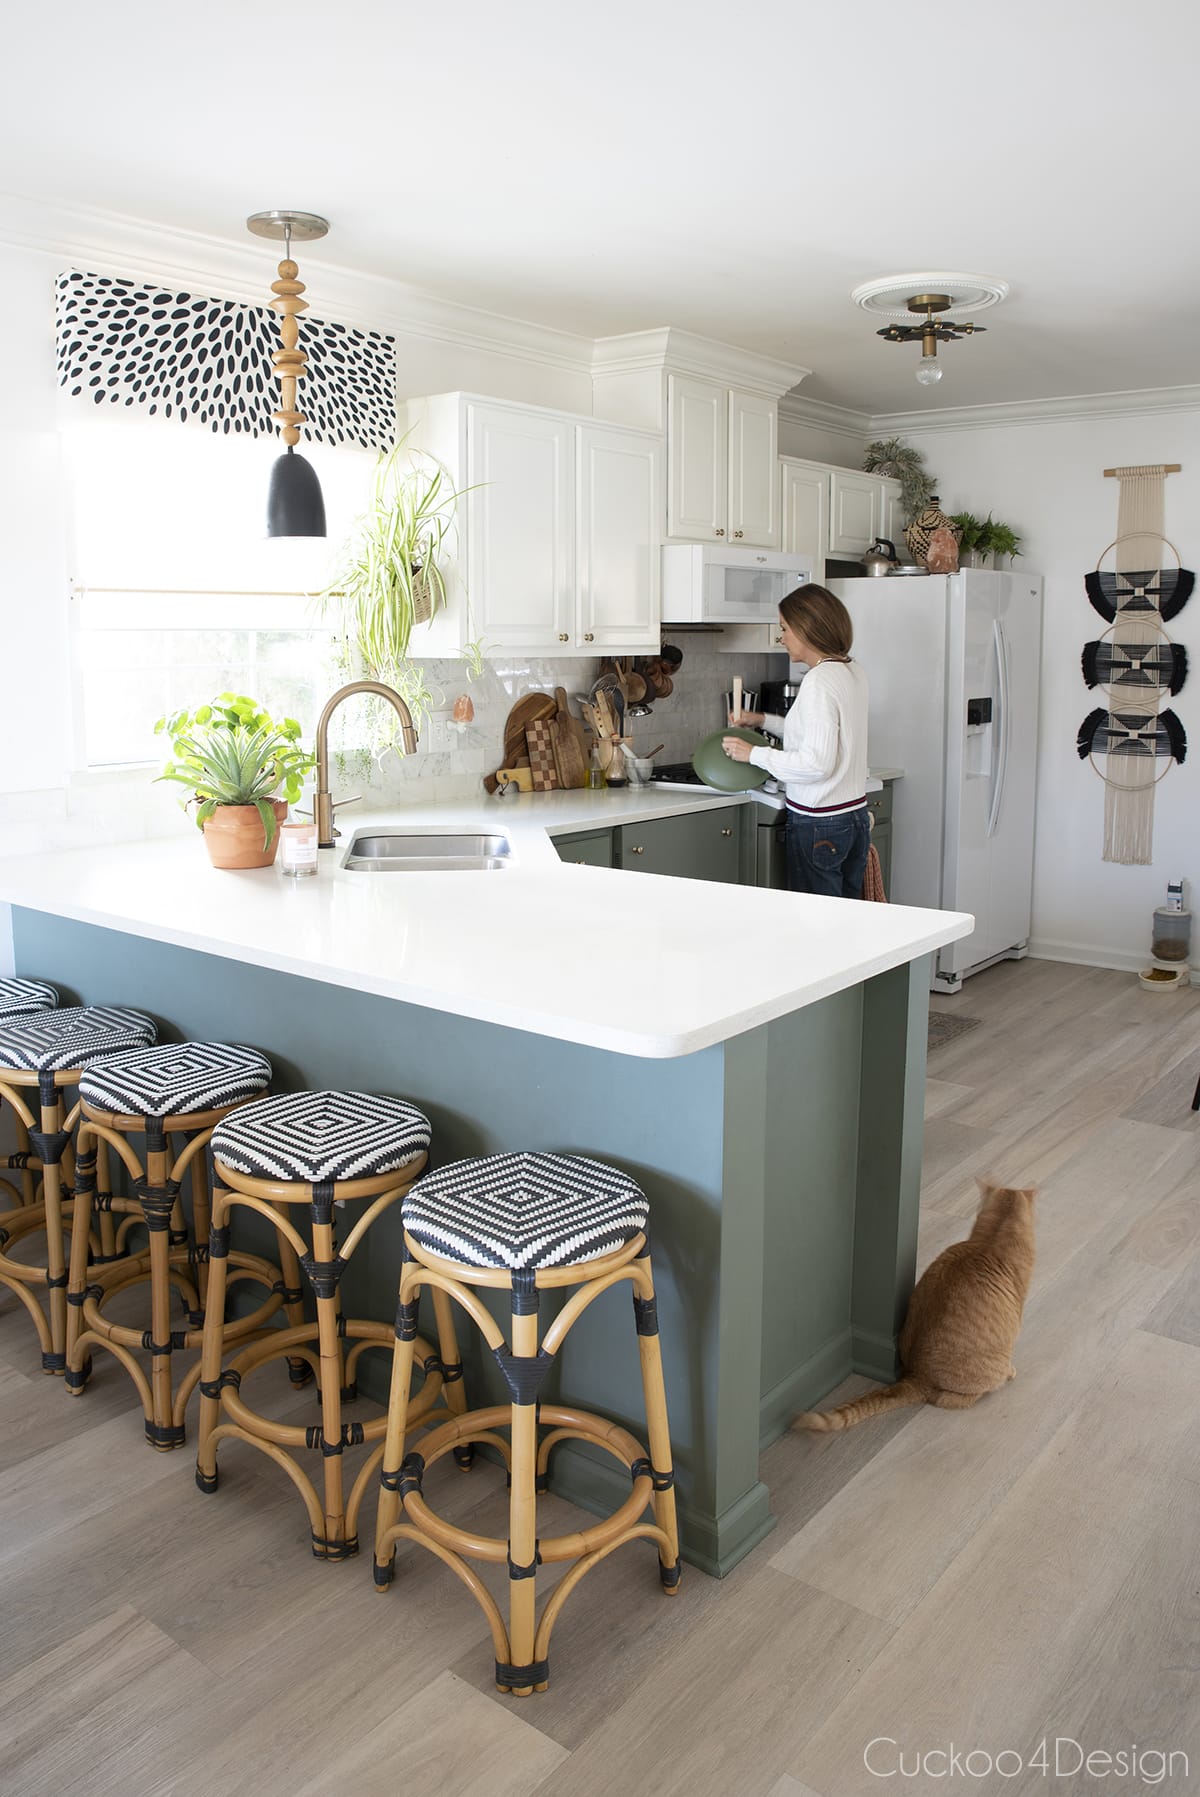 new green kitchen cabinets with rattan counter stools and wooden kitchen accents